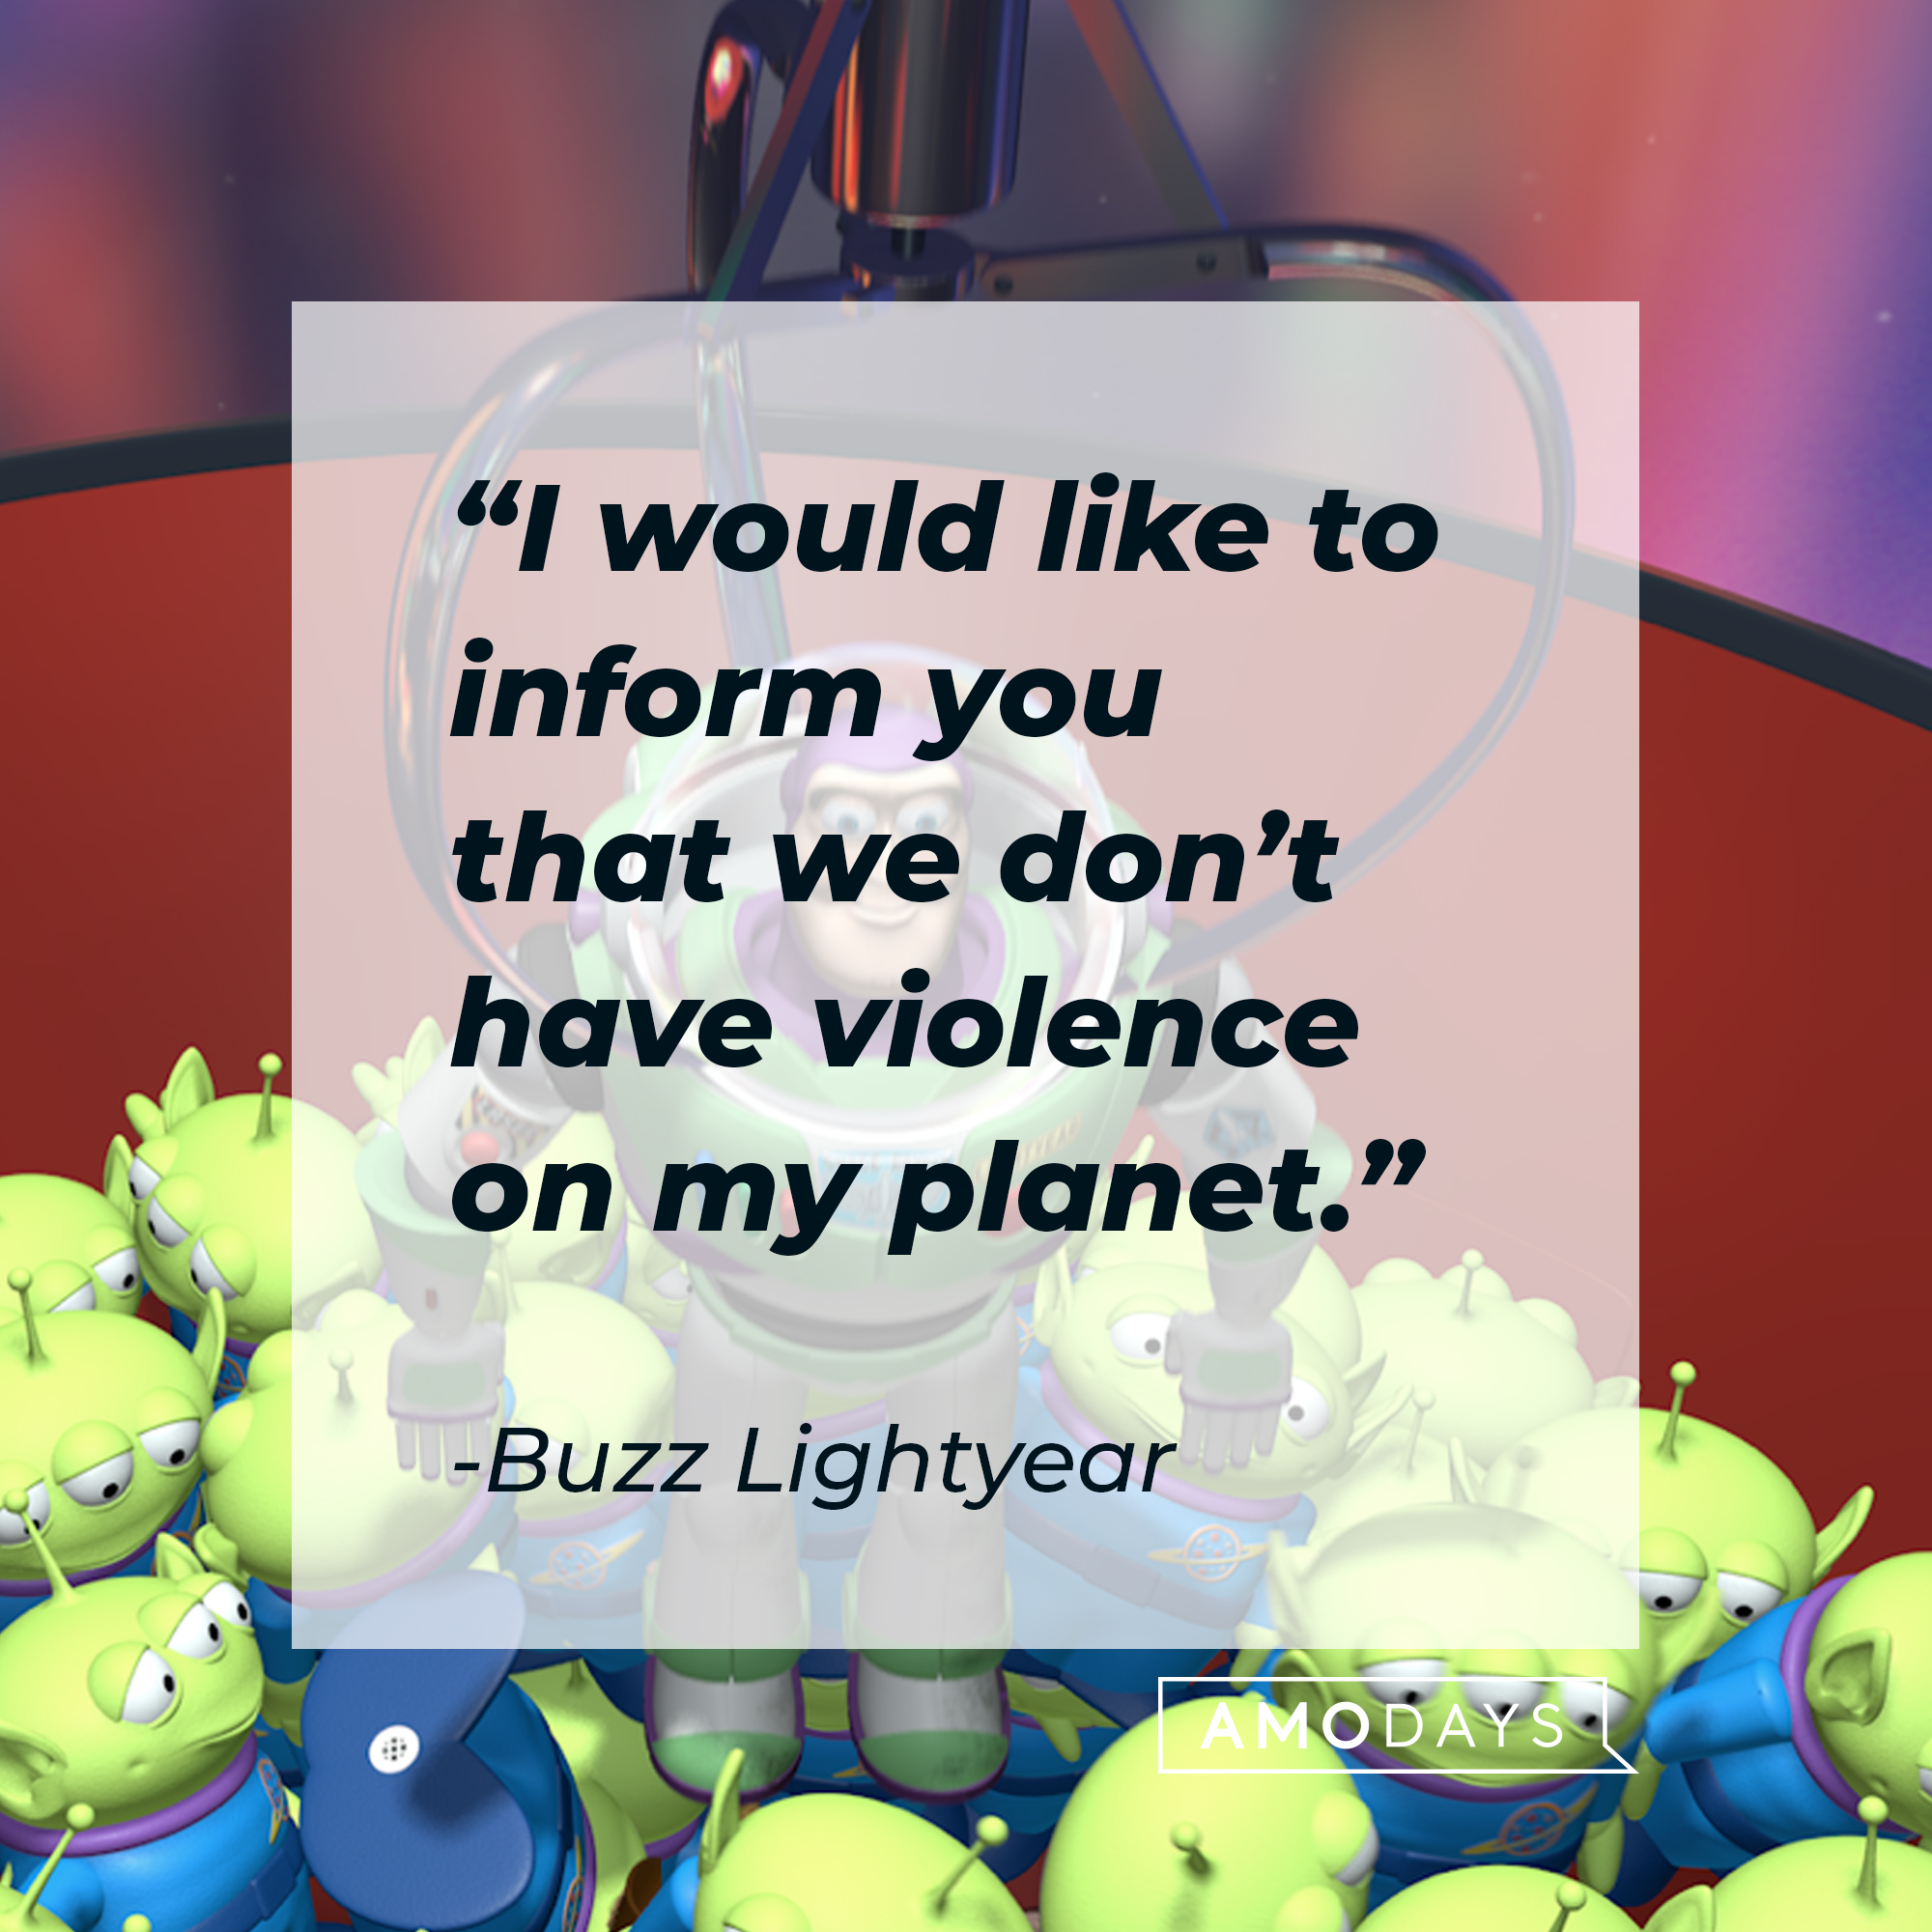 Buzz Lightyear's quote: "I would like to inform you that we don’t have violence on my planet." | Source: Facebook/BuzzLightyear